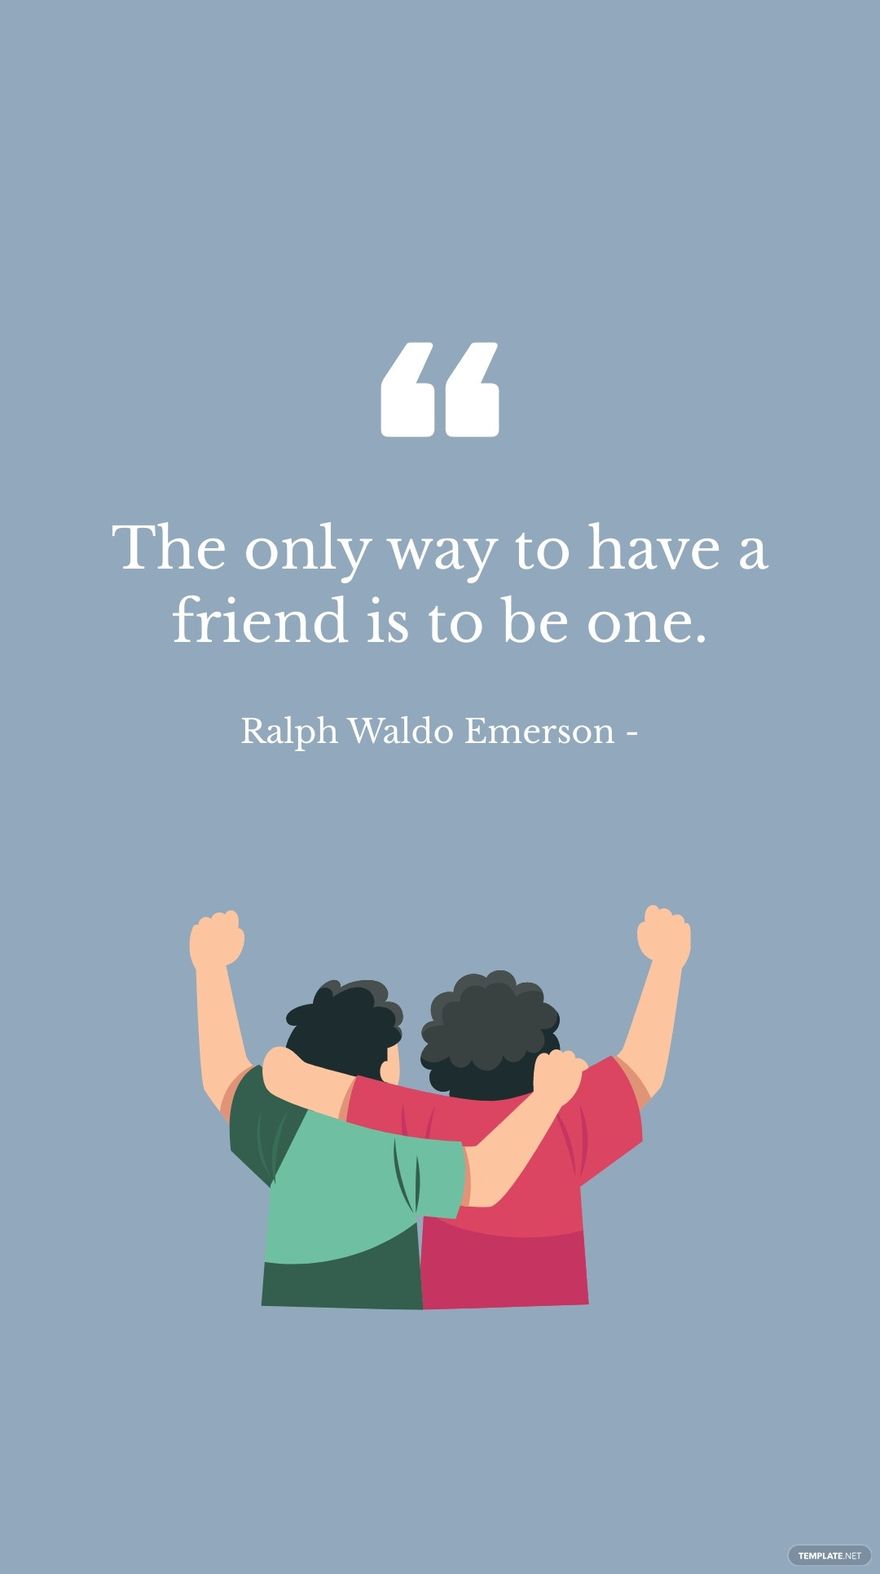 Free Ralph Waldo Emerson - The only way to have a friend is to be one. in JPG